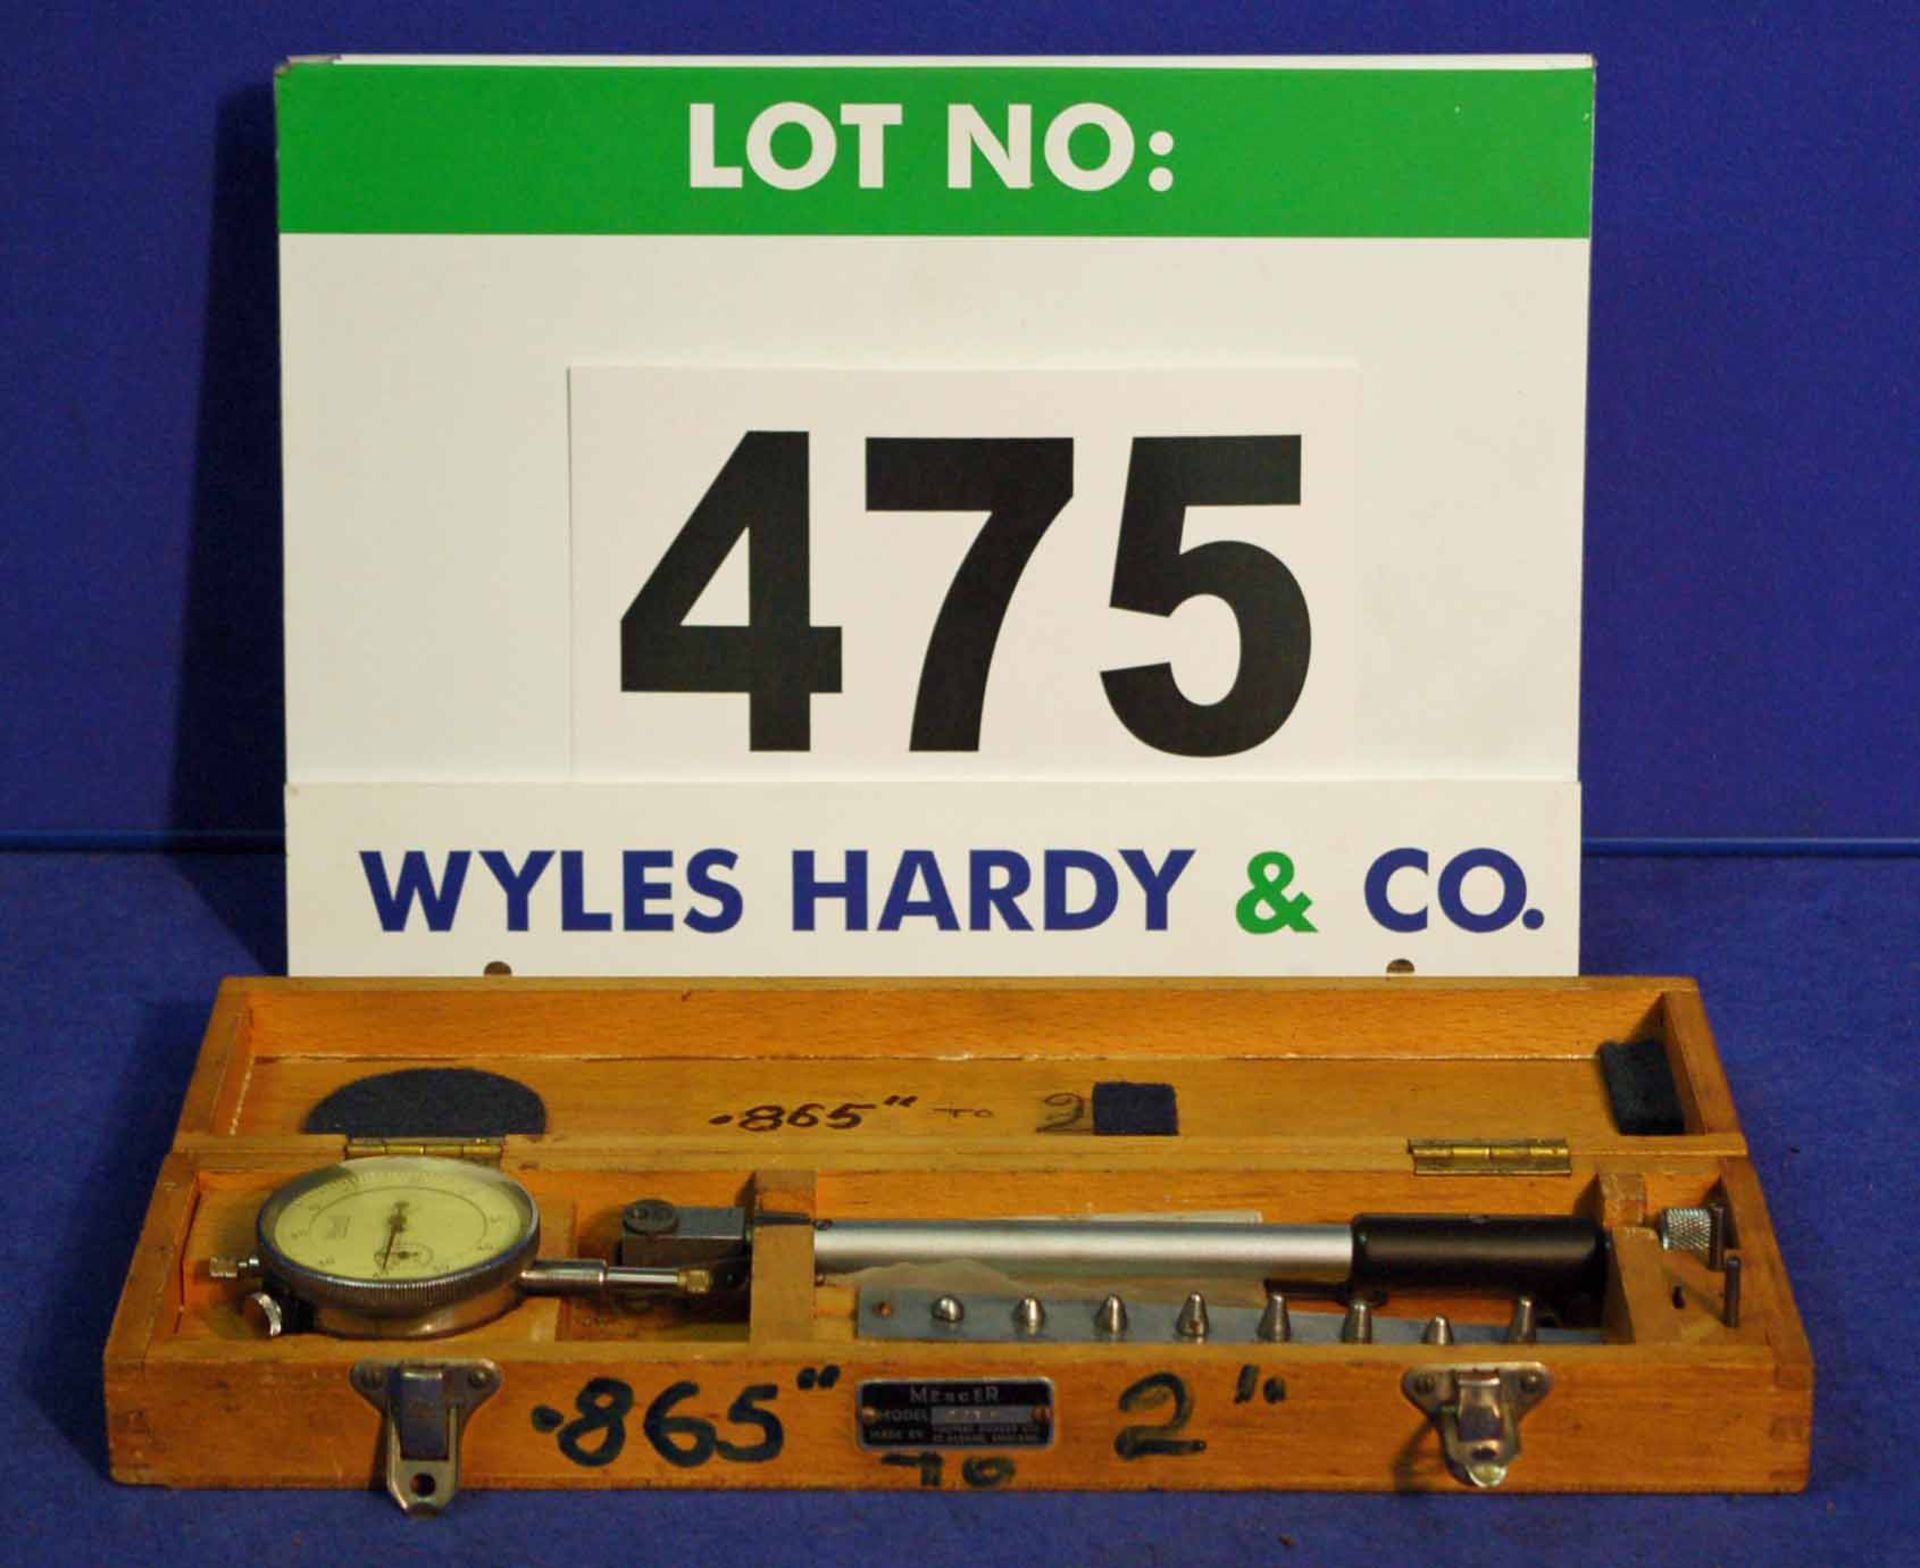 A MERCER Model 703/T .865-2 inch Dial Indicating Internal Bore Gauge in Wooden Case